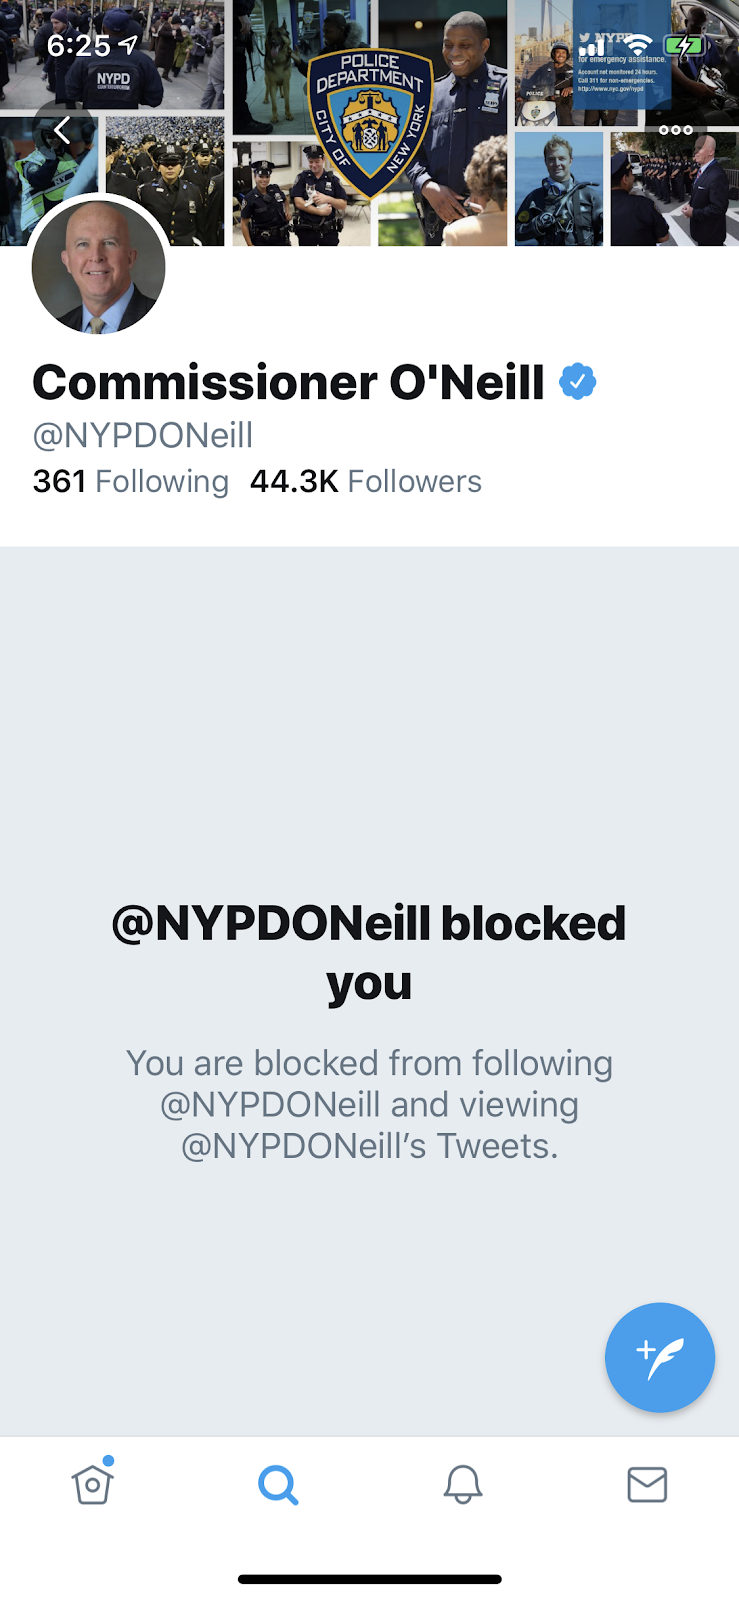 Evidence NYPD PC O'Neill Violating my 1st Amendment Rights